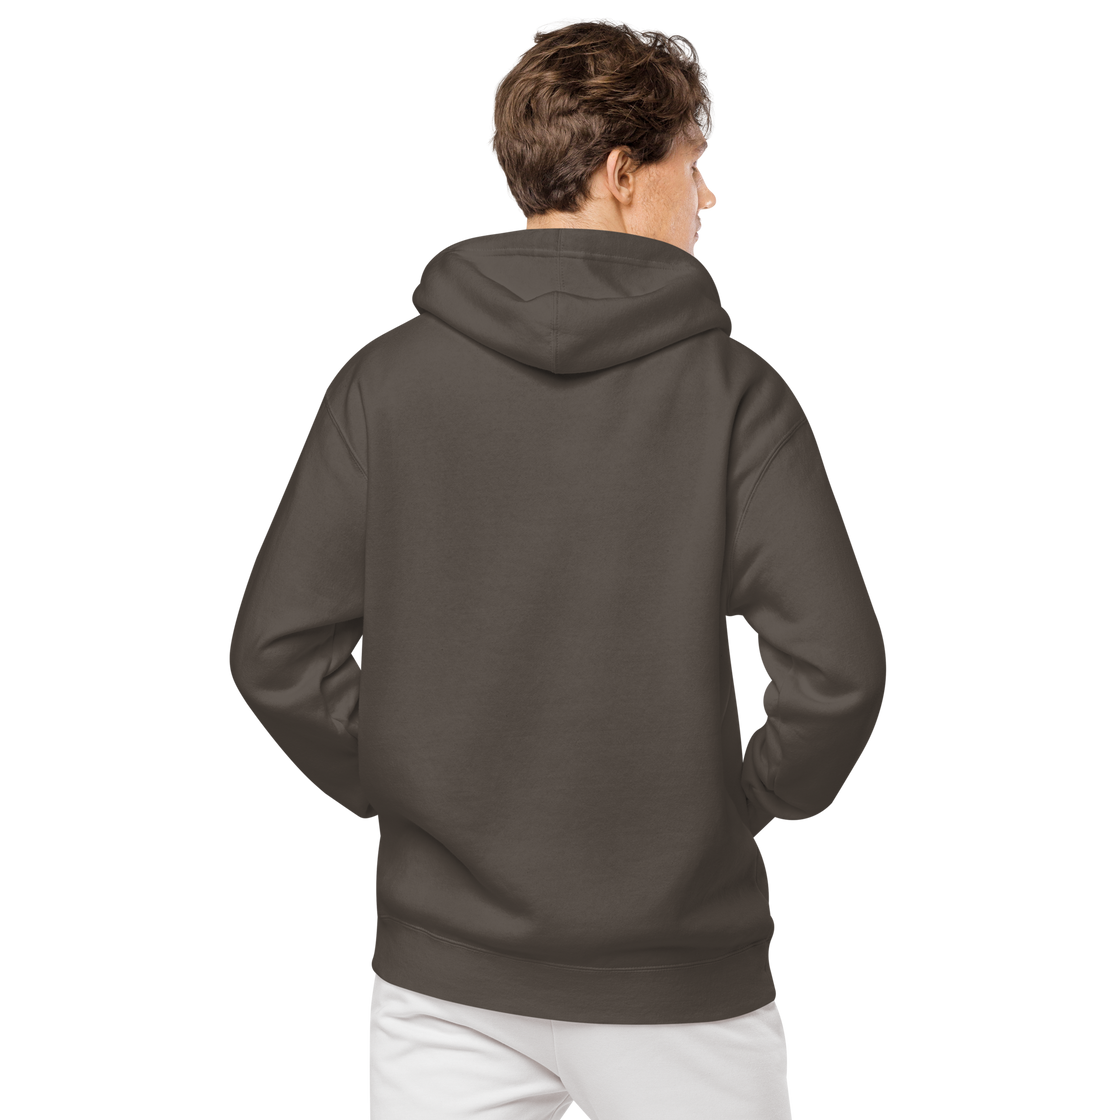 FLY³ pigment-dyed hoodie | Flycube